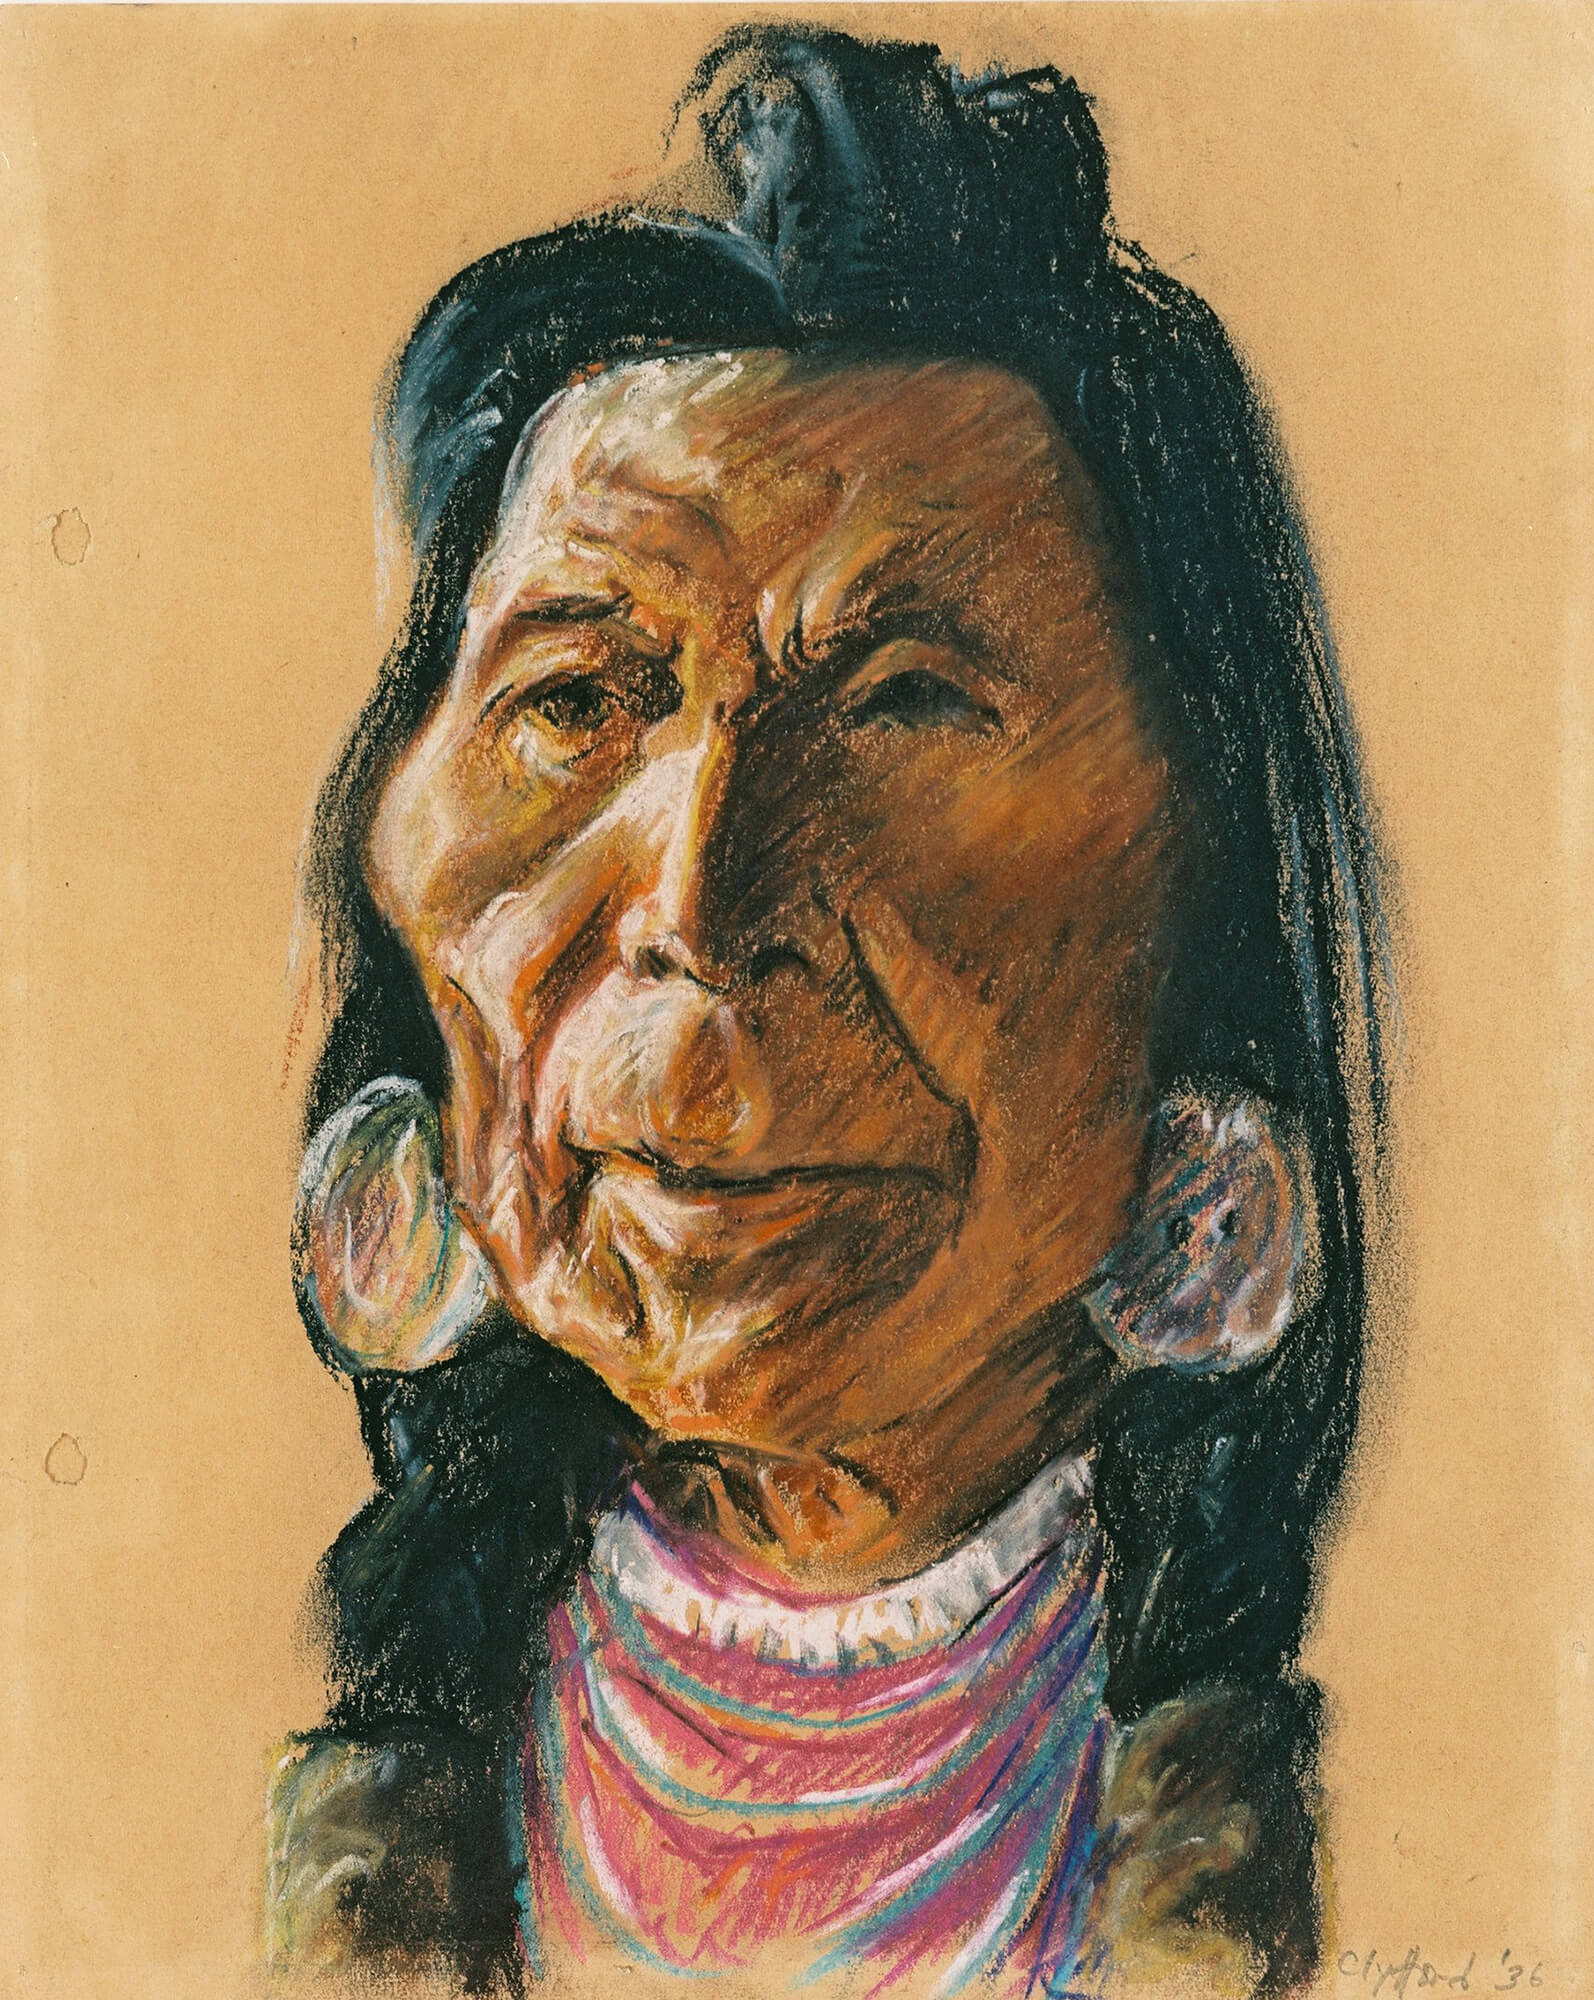 Pastel on paper sketch of a Native American man's face and neck